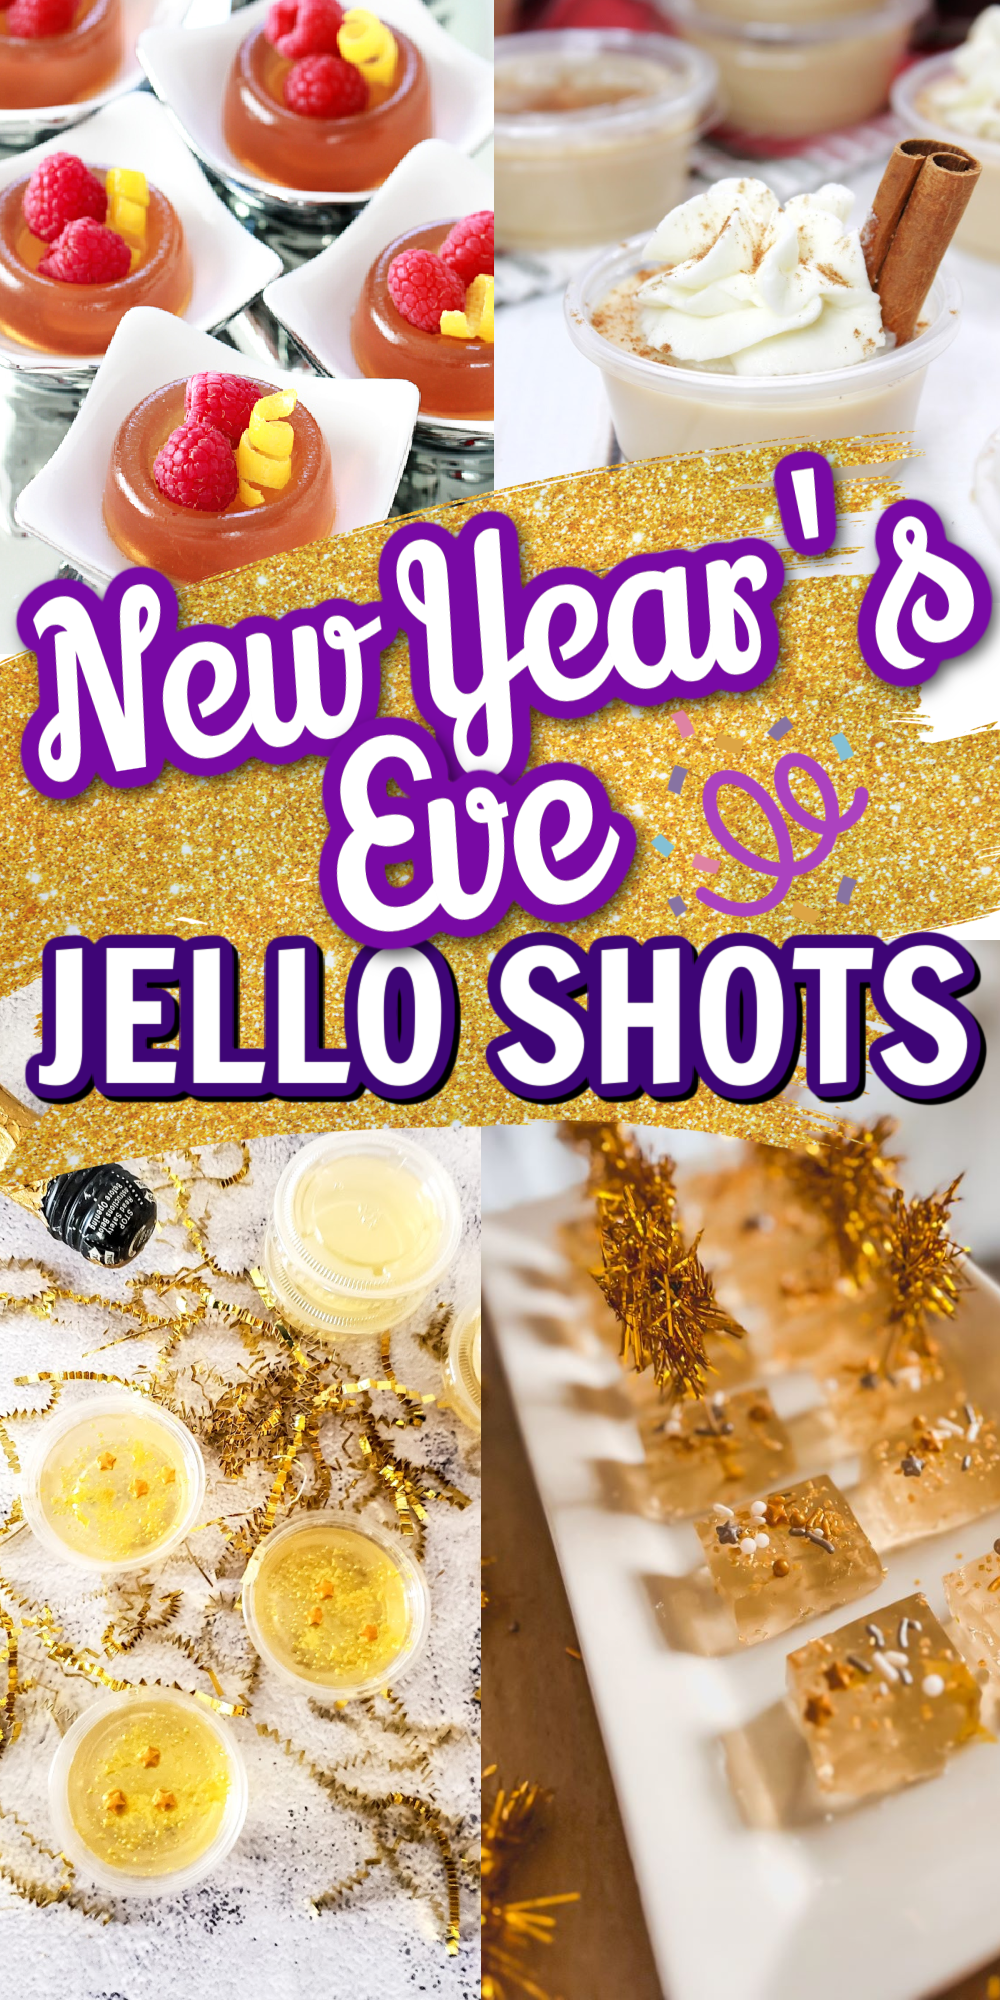 A collage of New Year's Eve jello shots. Including champagne jello shots and jello shots with fruit.